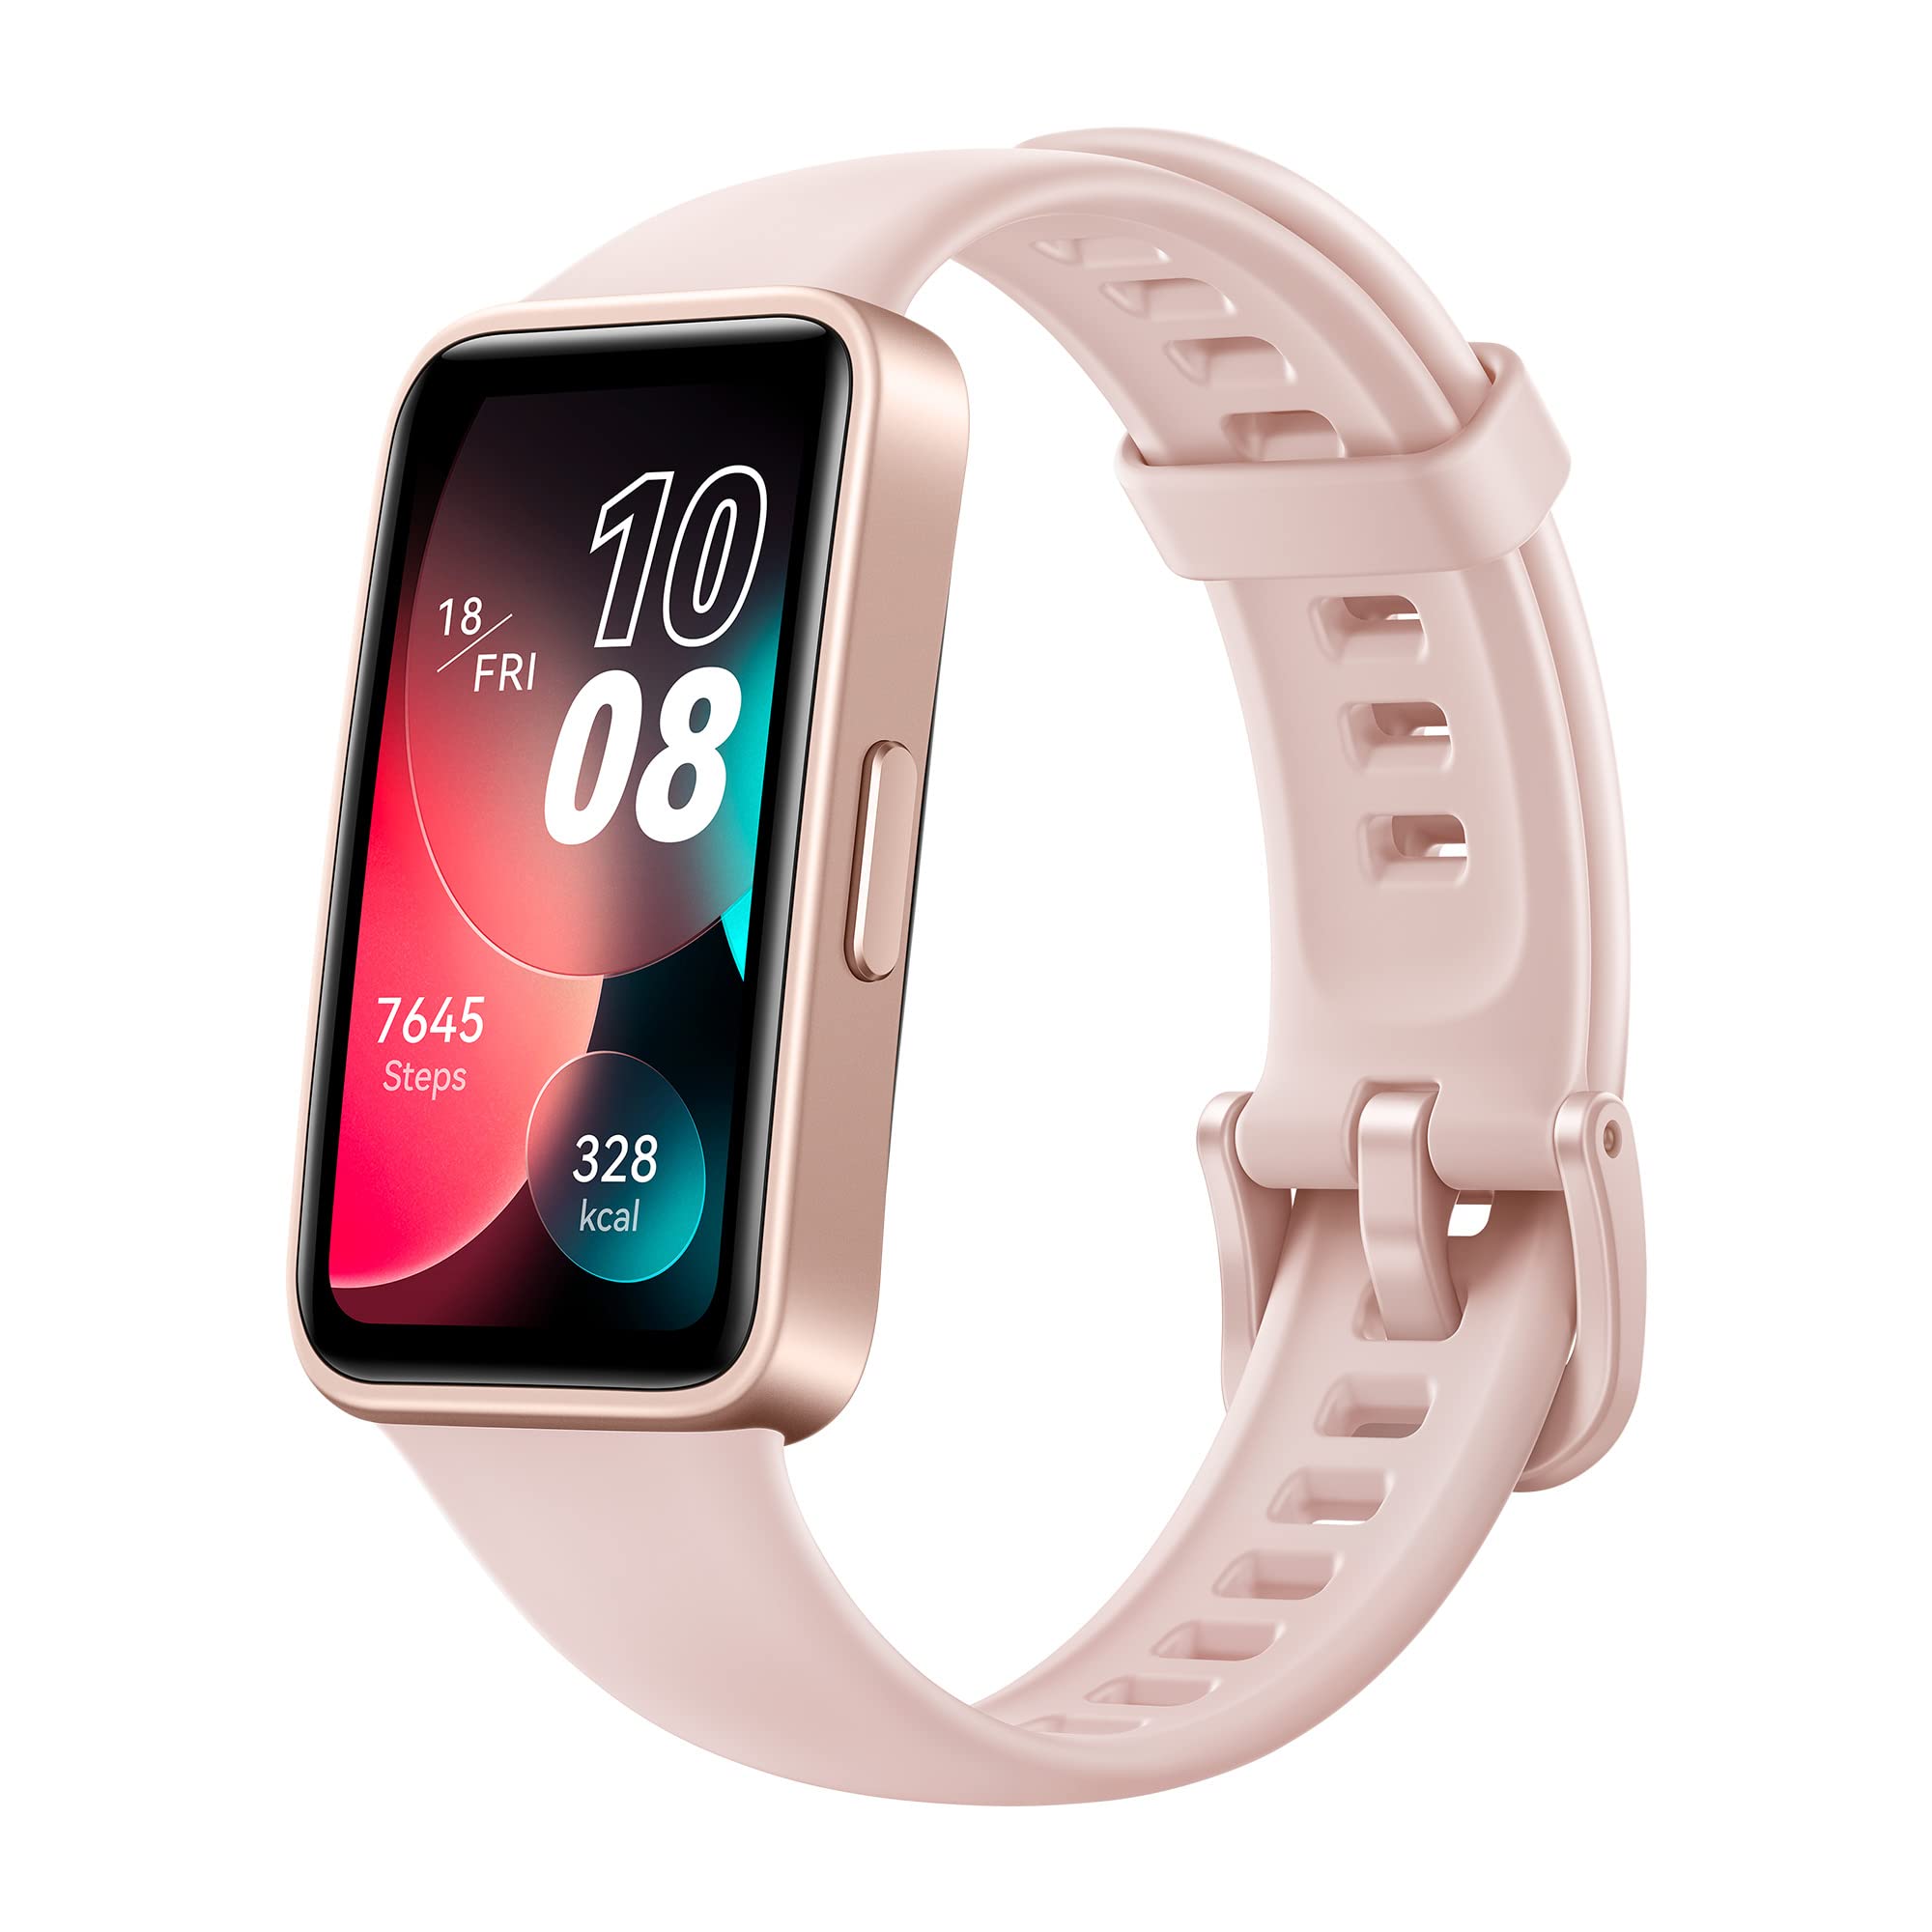 HUAWEI Band 8 Fitness Watch - Ultra Thin Smart Band design with Up to 2 Weeks Battery Life - Activity Trackers Compatible with Android & iOS with Full Health Management & Sleep Tracking - Pink